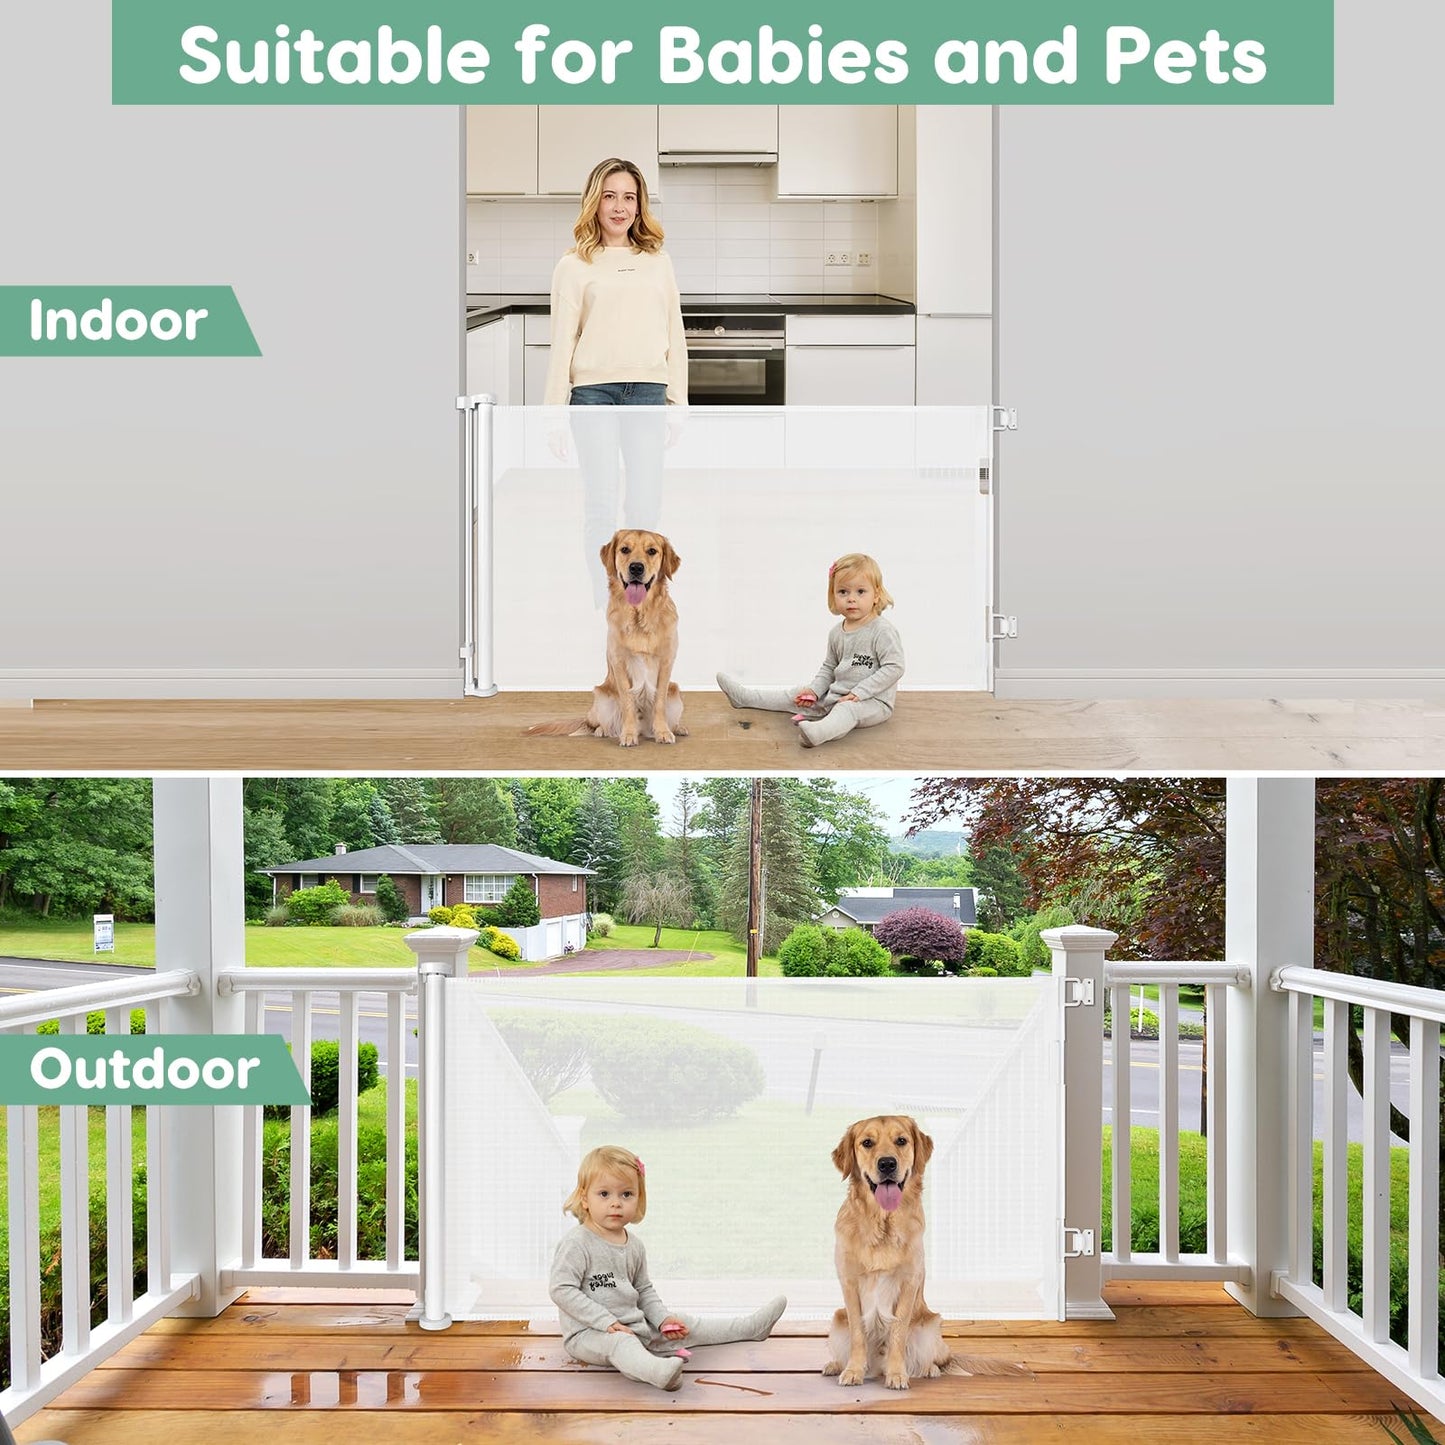 Dog Retractable Gate Barrier